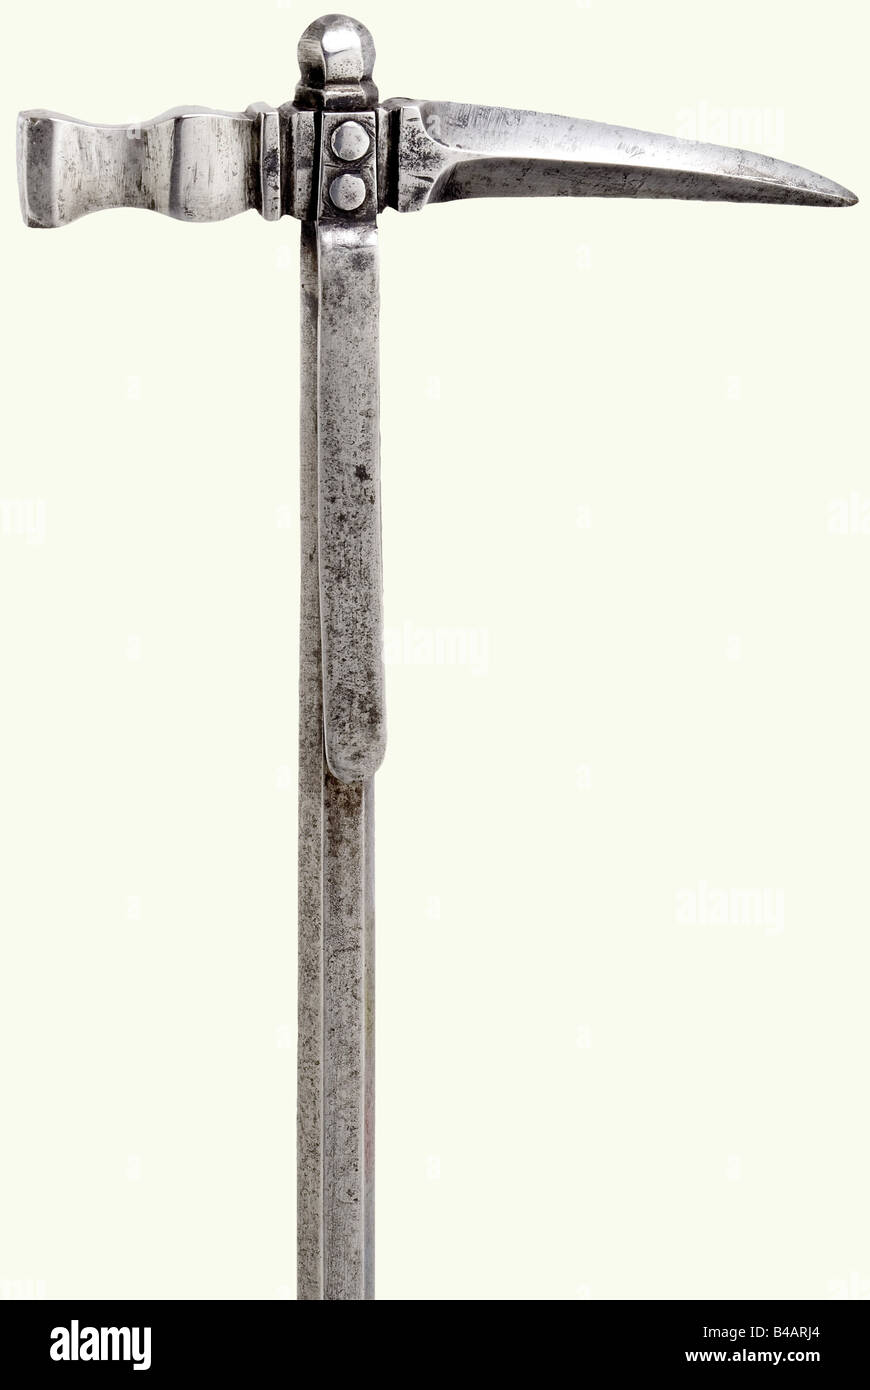 A German or Polish horseman's war hammer, circa 1600. The head has a  slightly curved quadrangular beak with a square hammer head on the back.  Hollow forged hexagonal shaft with a (replacement?)